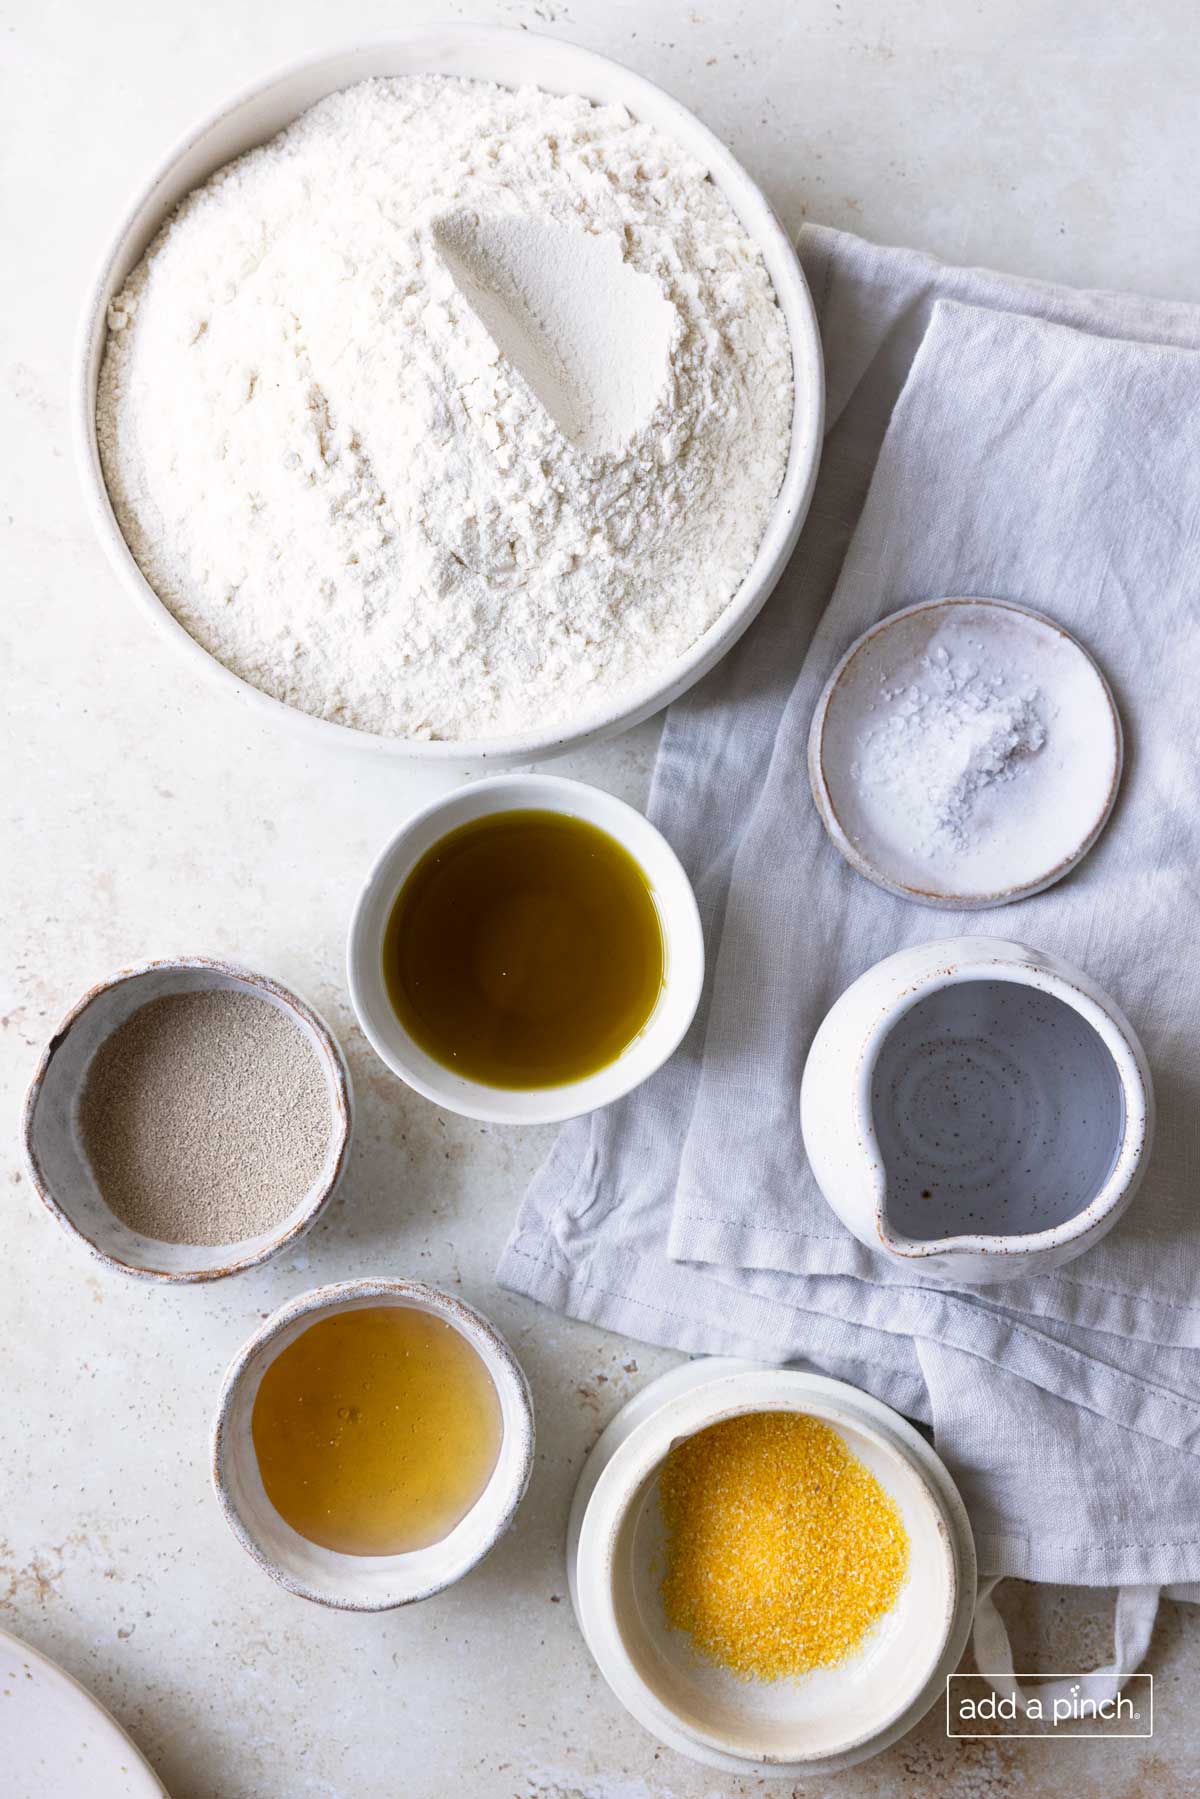 Photo of ingredients used to make pizza dough and the extra ingredient we use to help the dough from sticking to the pizza peel or pizza stone.